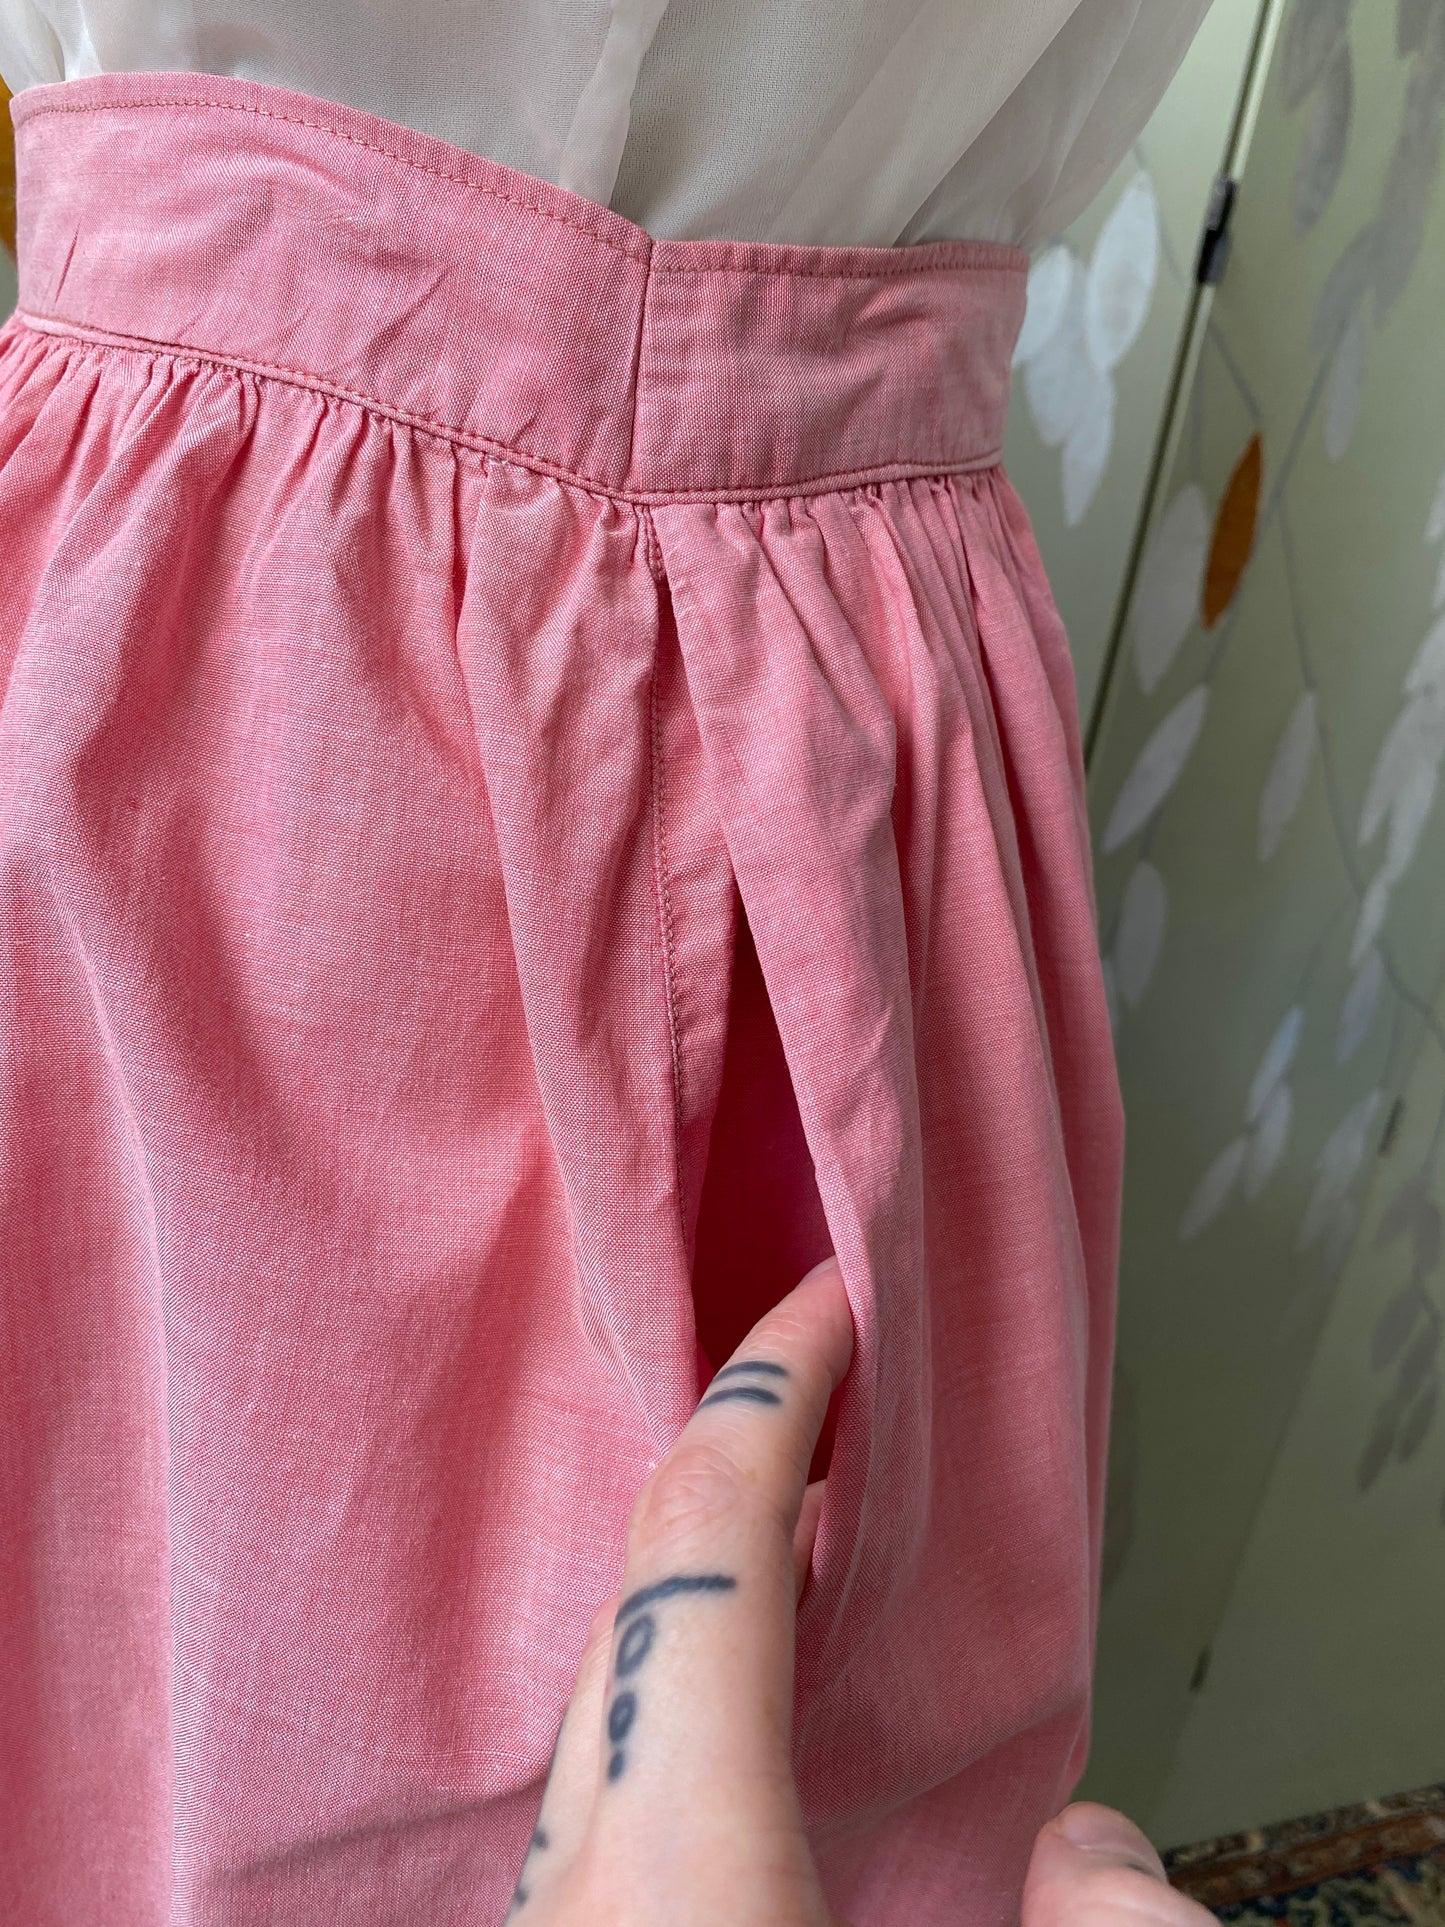 Vintage 1950s Pink Cotton Gathered Skirt, W24"